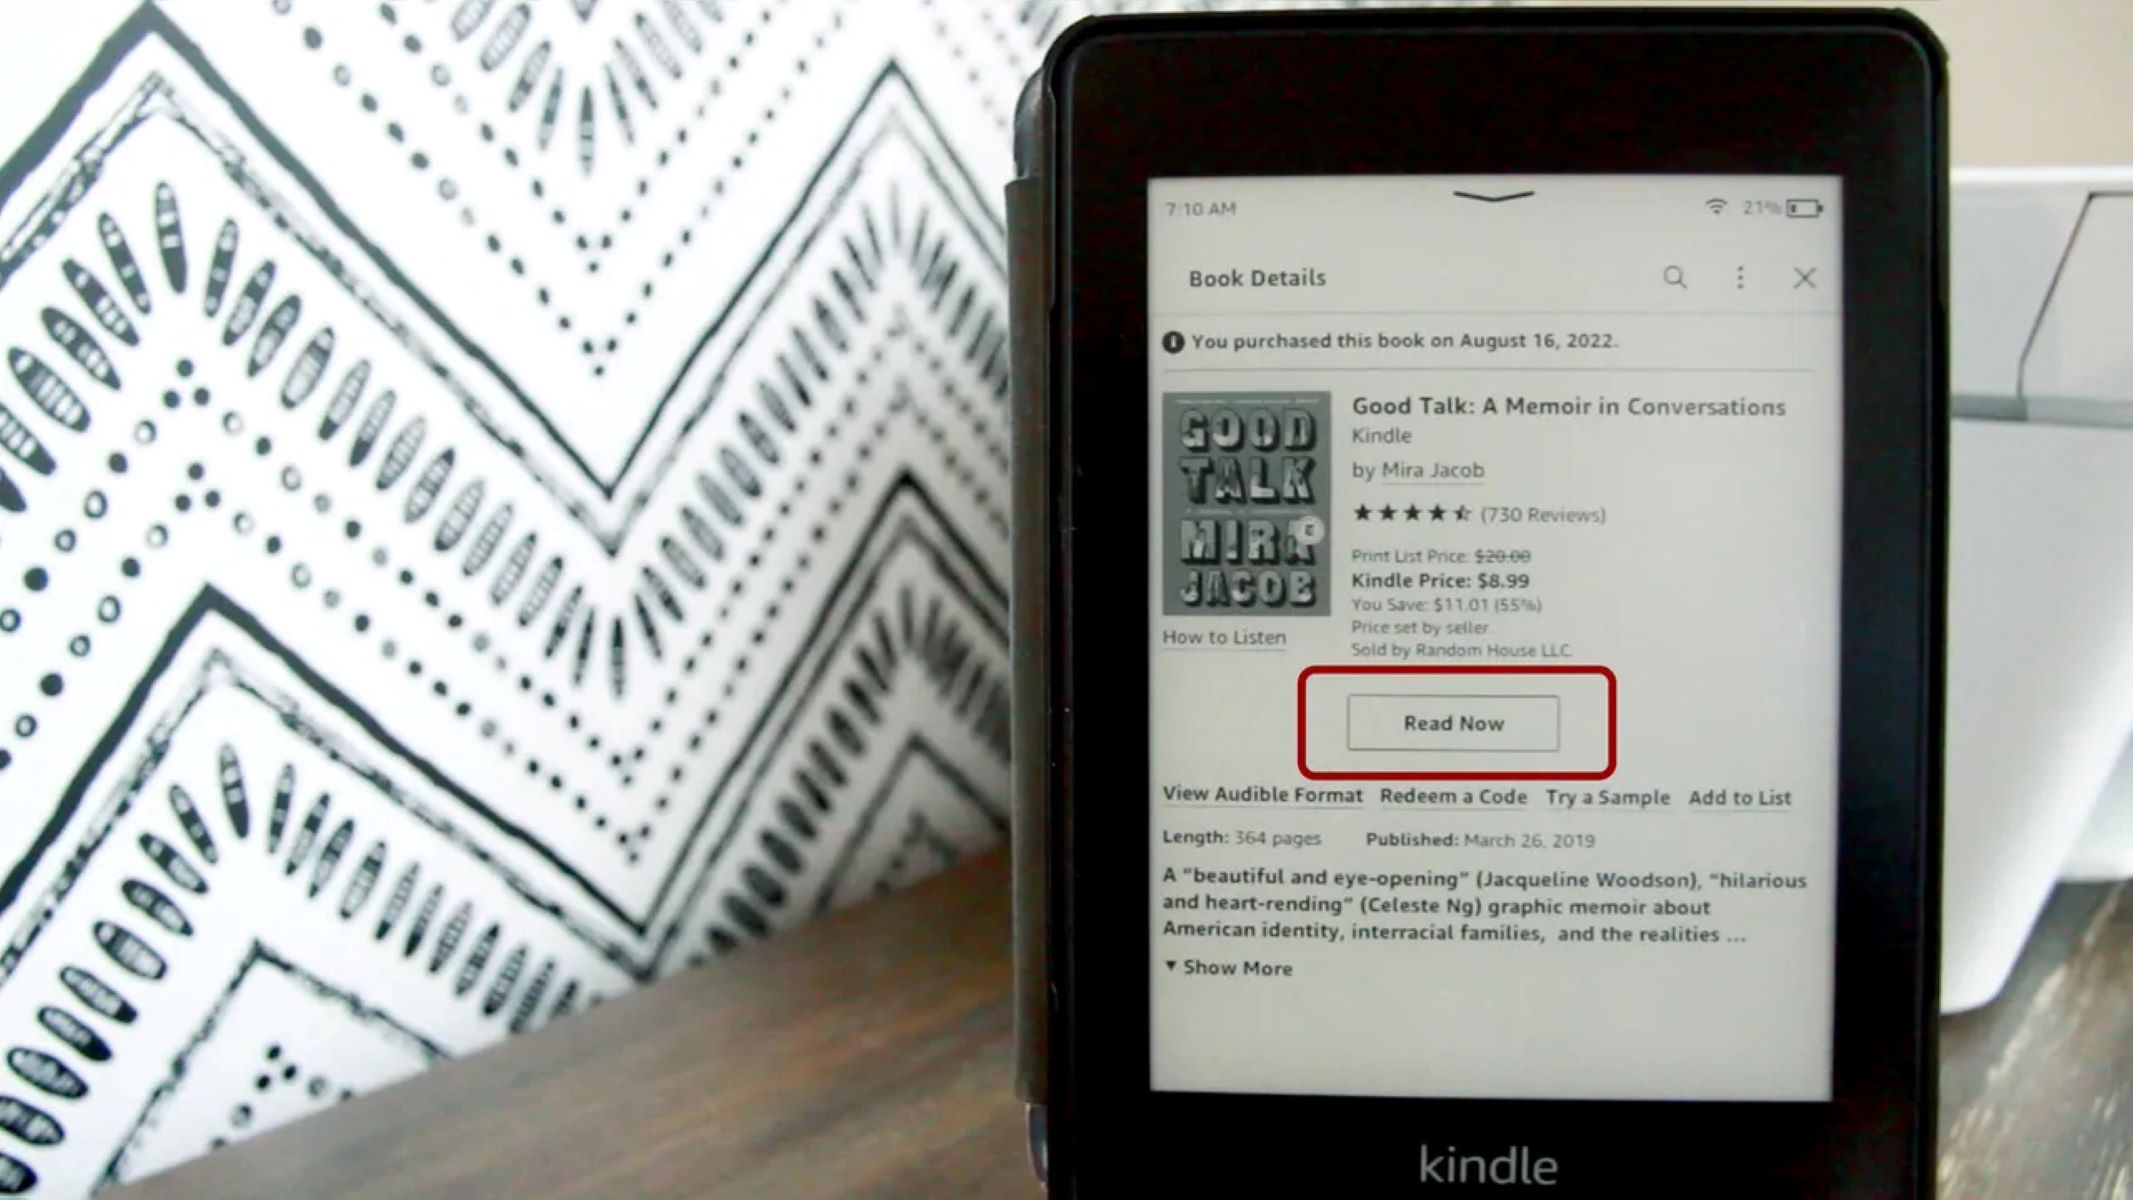 How To See Kindle Purchases